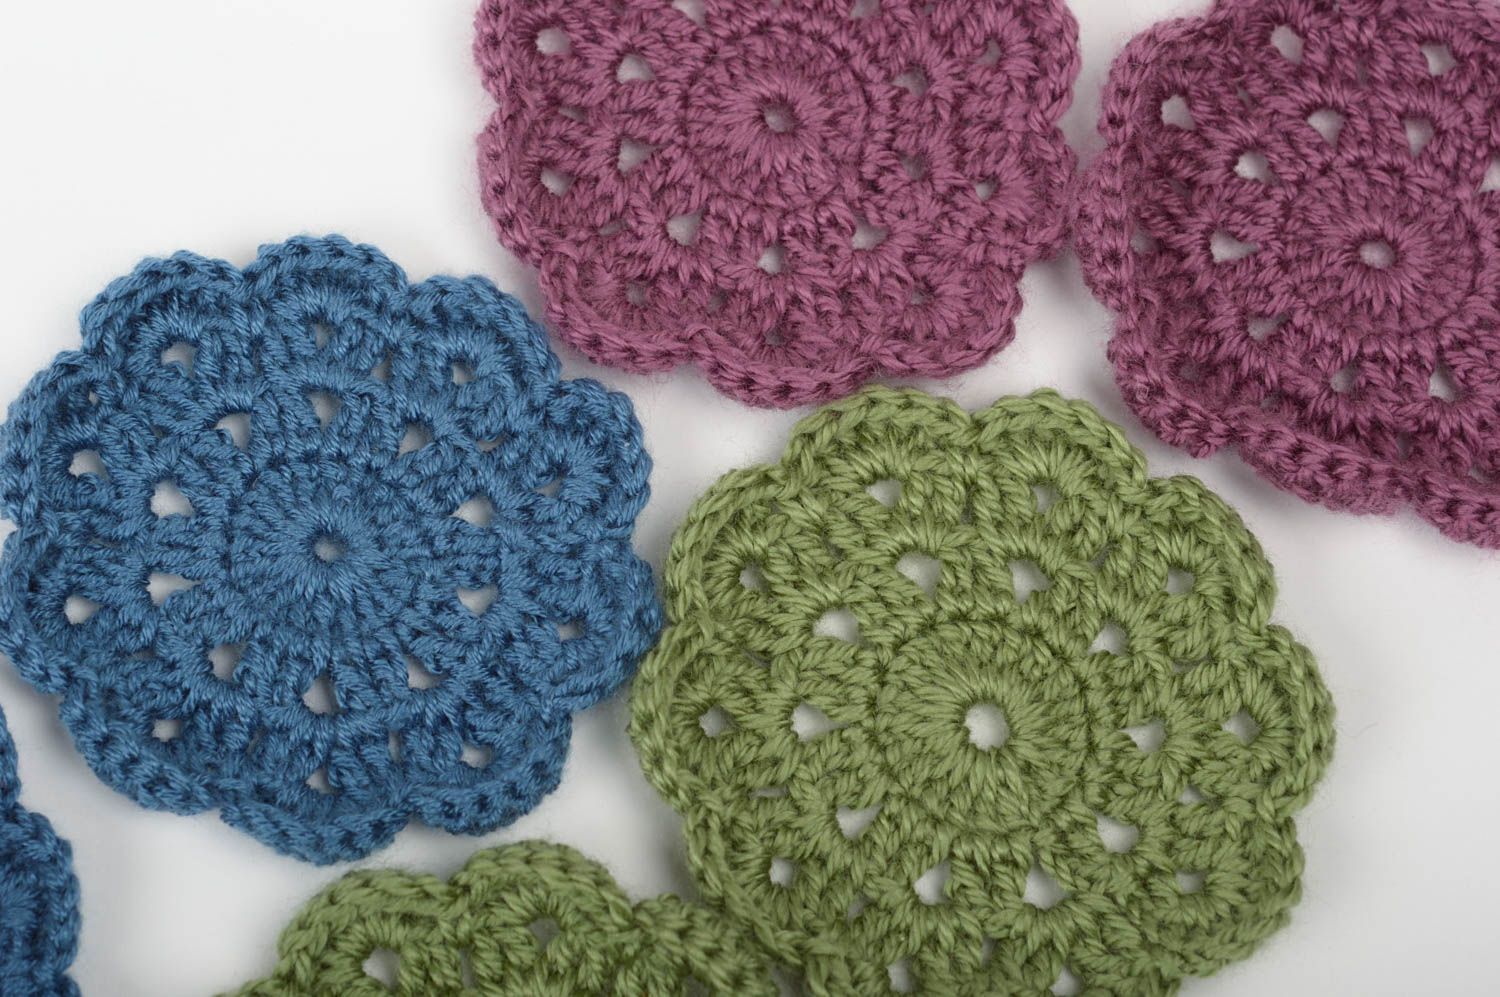 Handmade stands for hot crocheted stand for cups kitchen textiles home decor photo 2